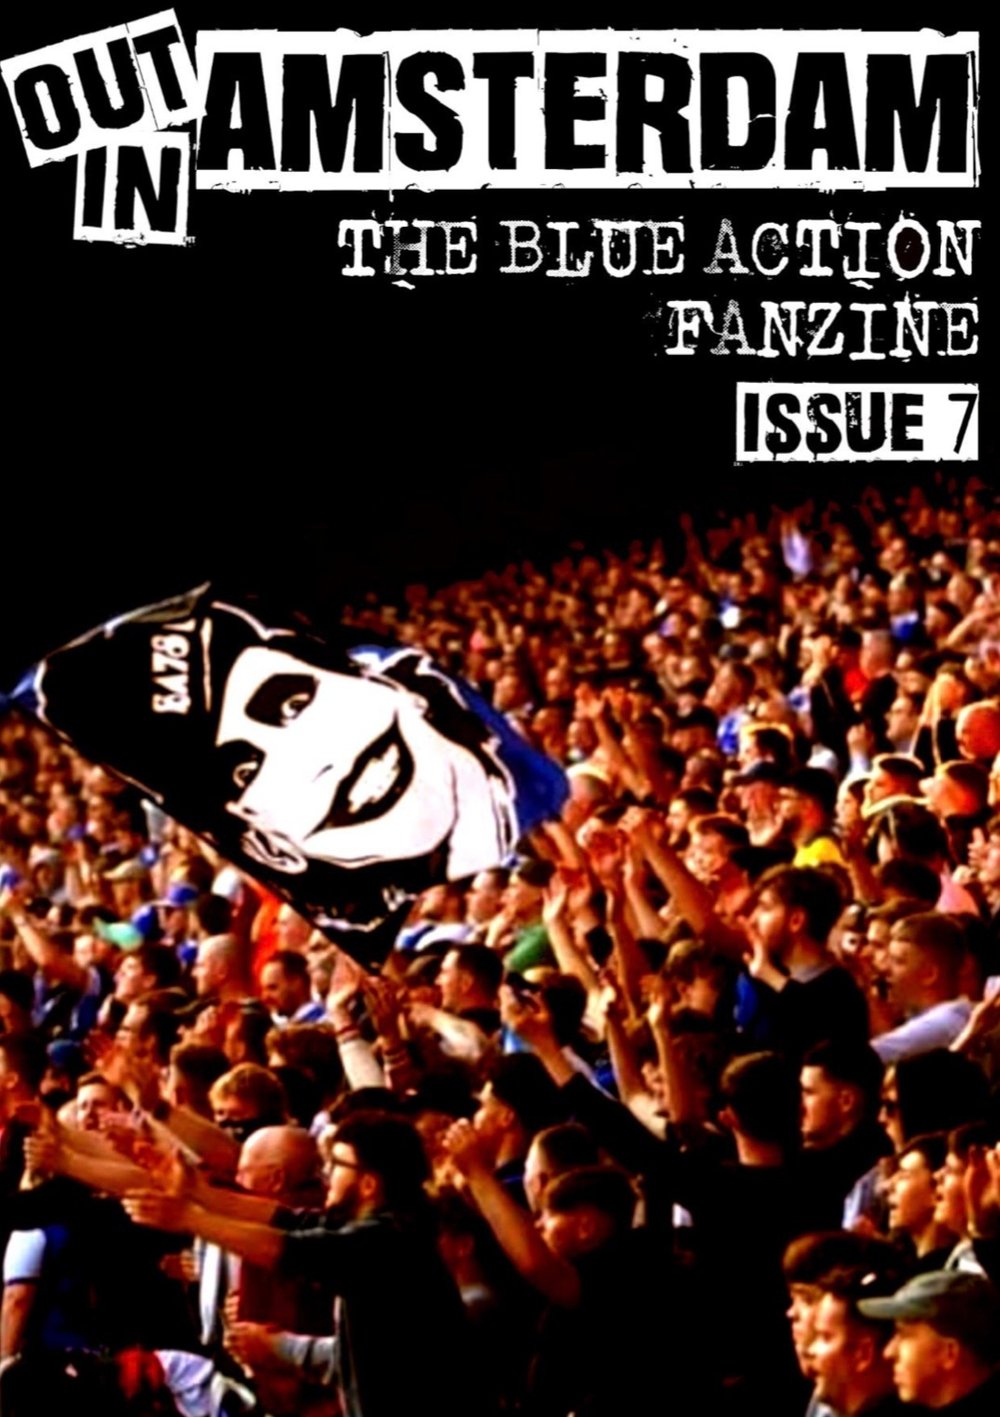 Out In Amsterdam The Blue Action Fanzine (Issue 7)